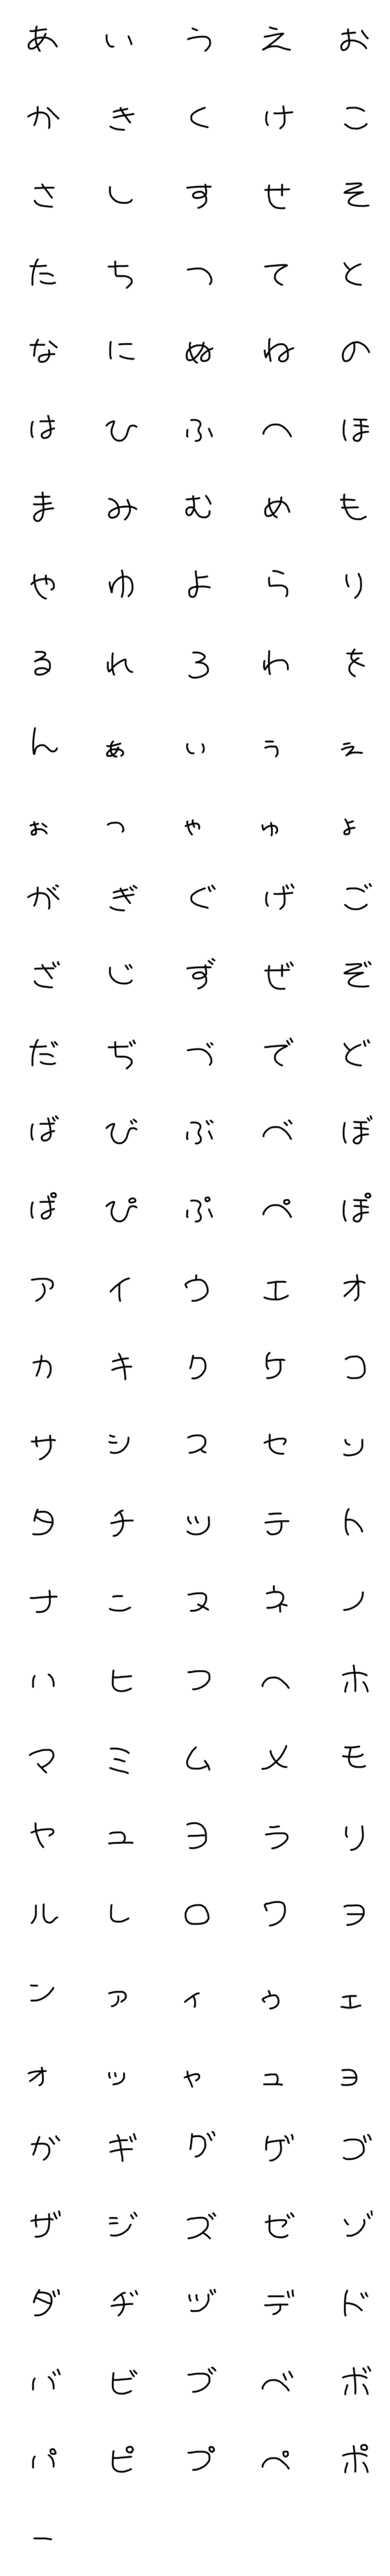 [LINE絵文字]【手書き まる文字】の画像一覧